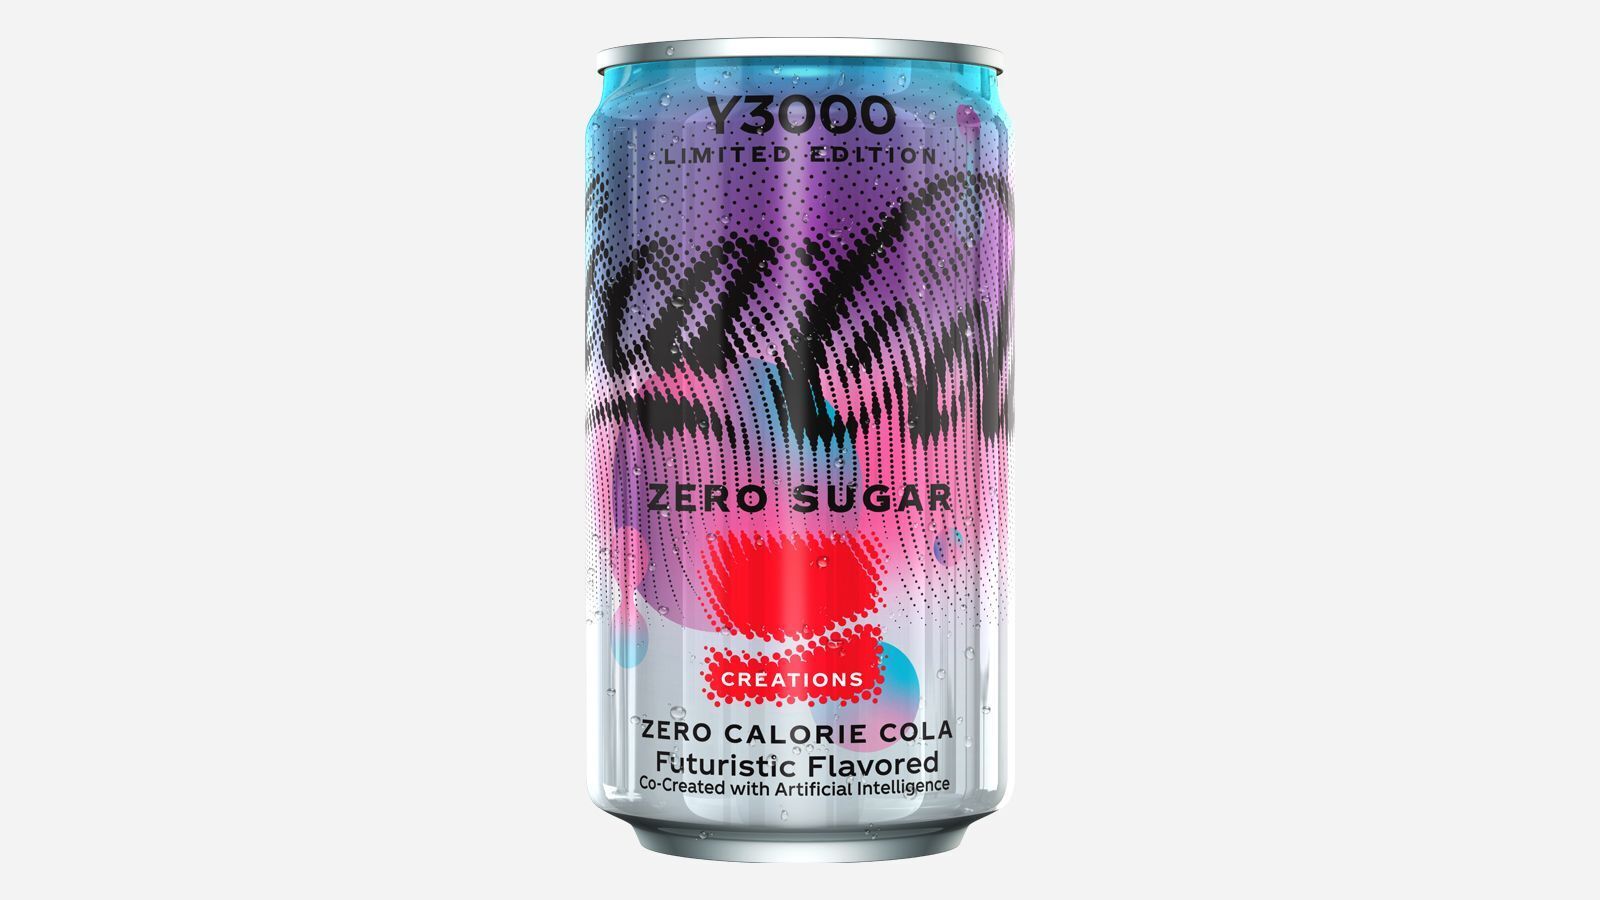 Cokes latest mystery flavor is here